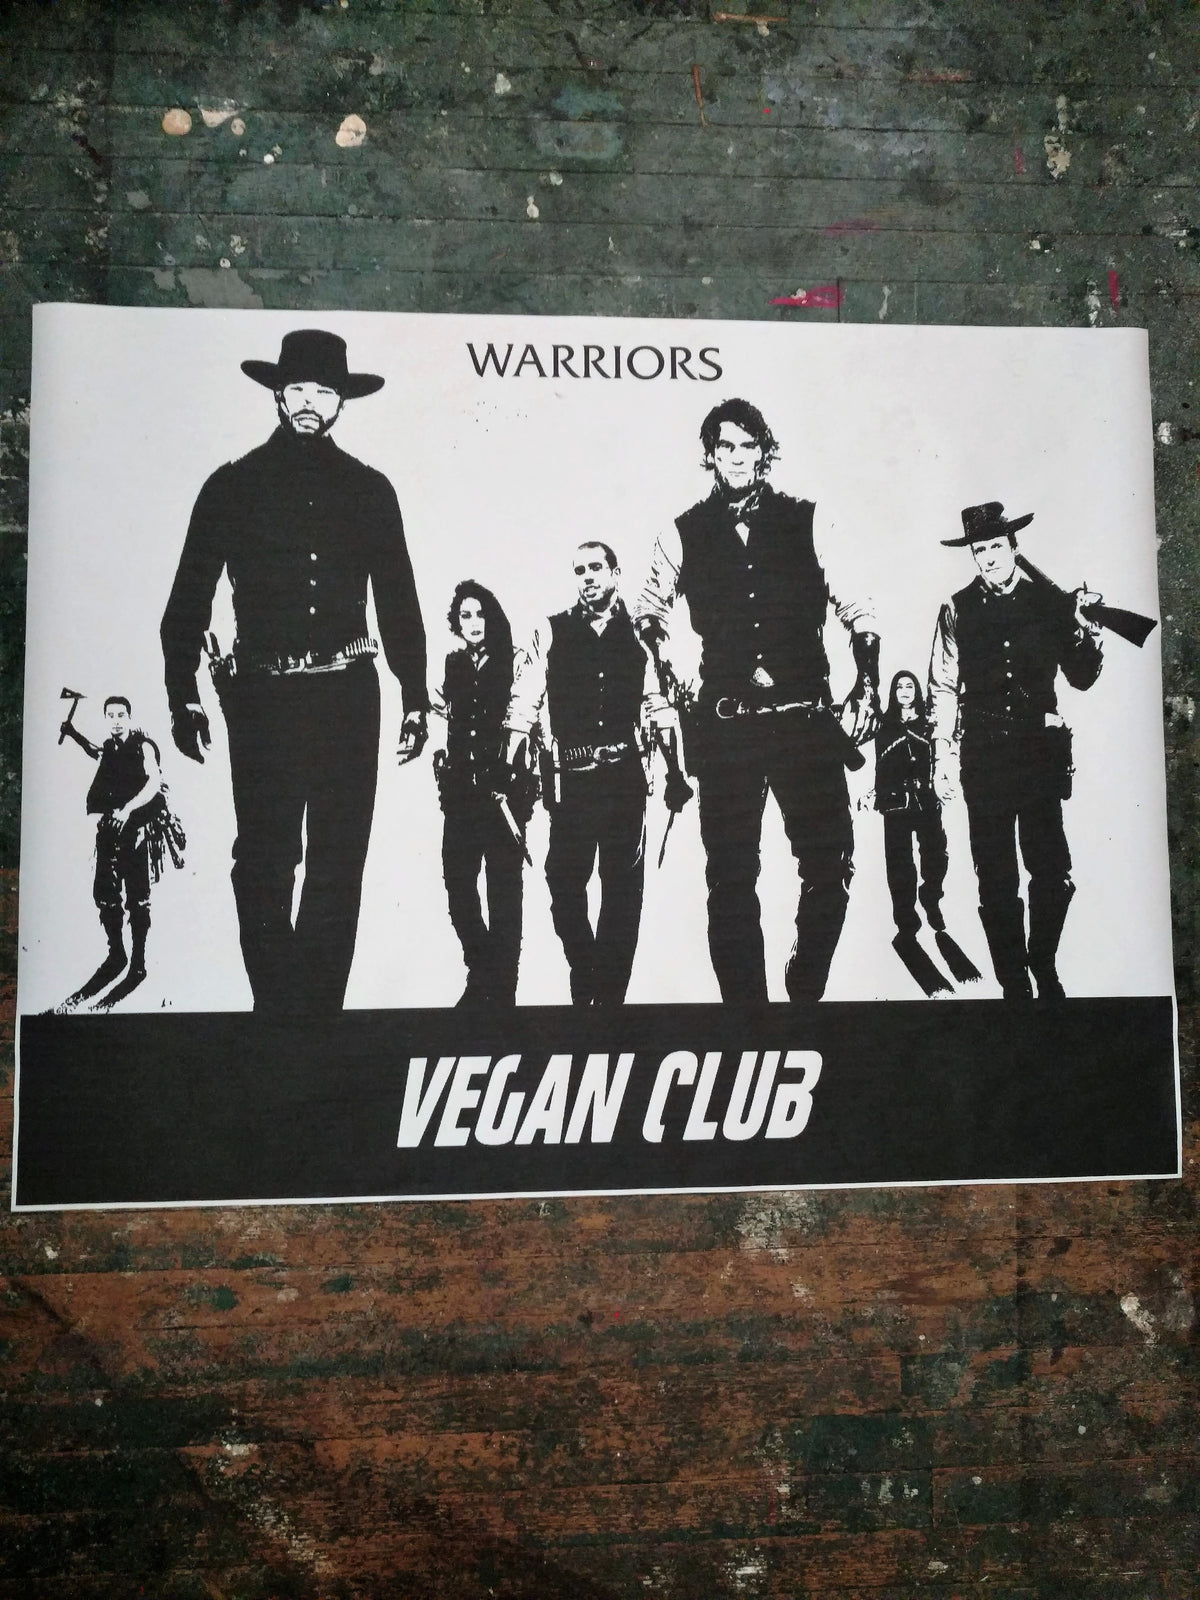 Limited Ed. Street Art NewsPrint Poster Vegan Club featuring Warriors - pic by @chefitophoto